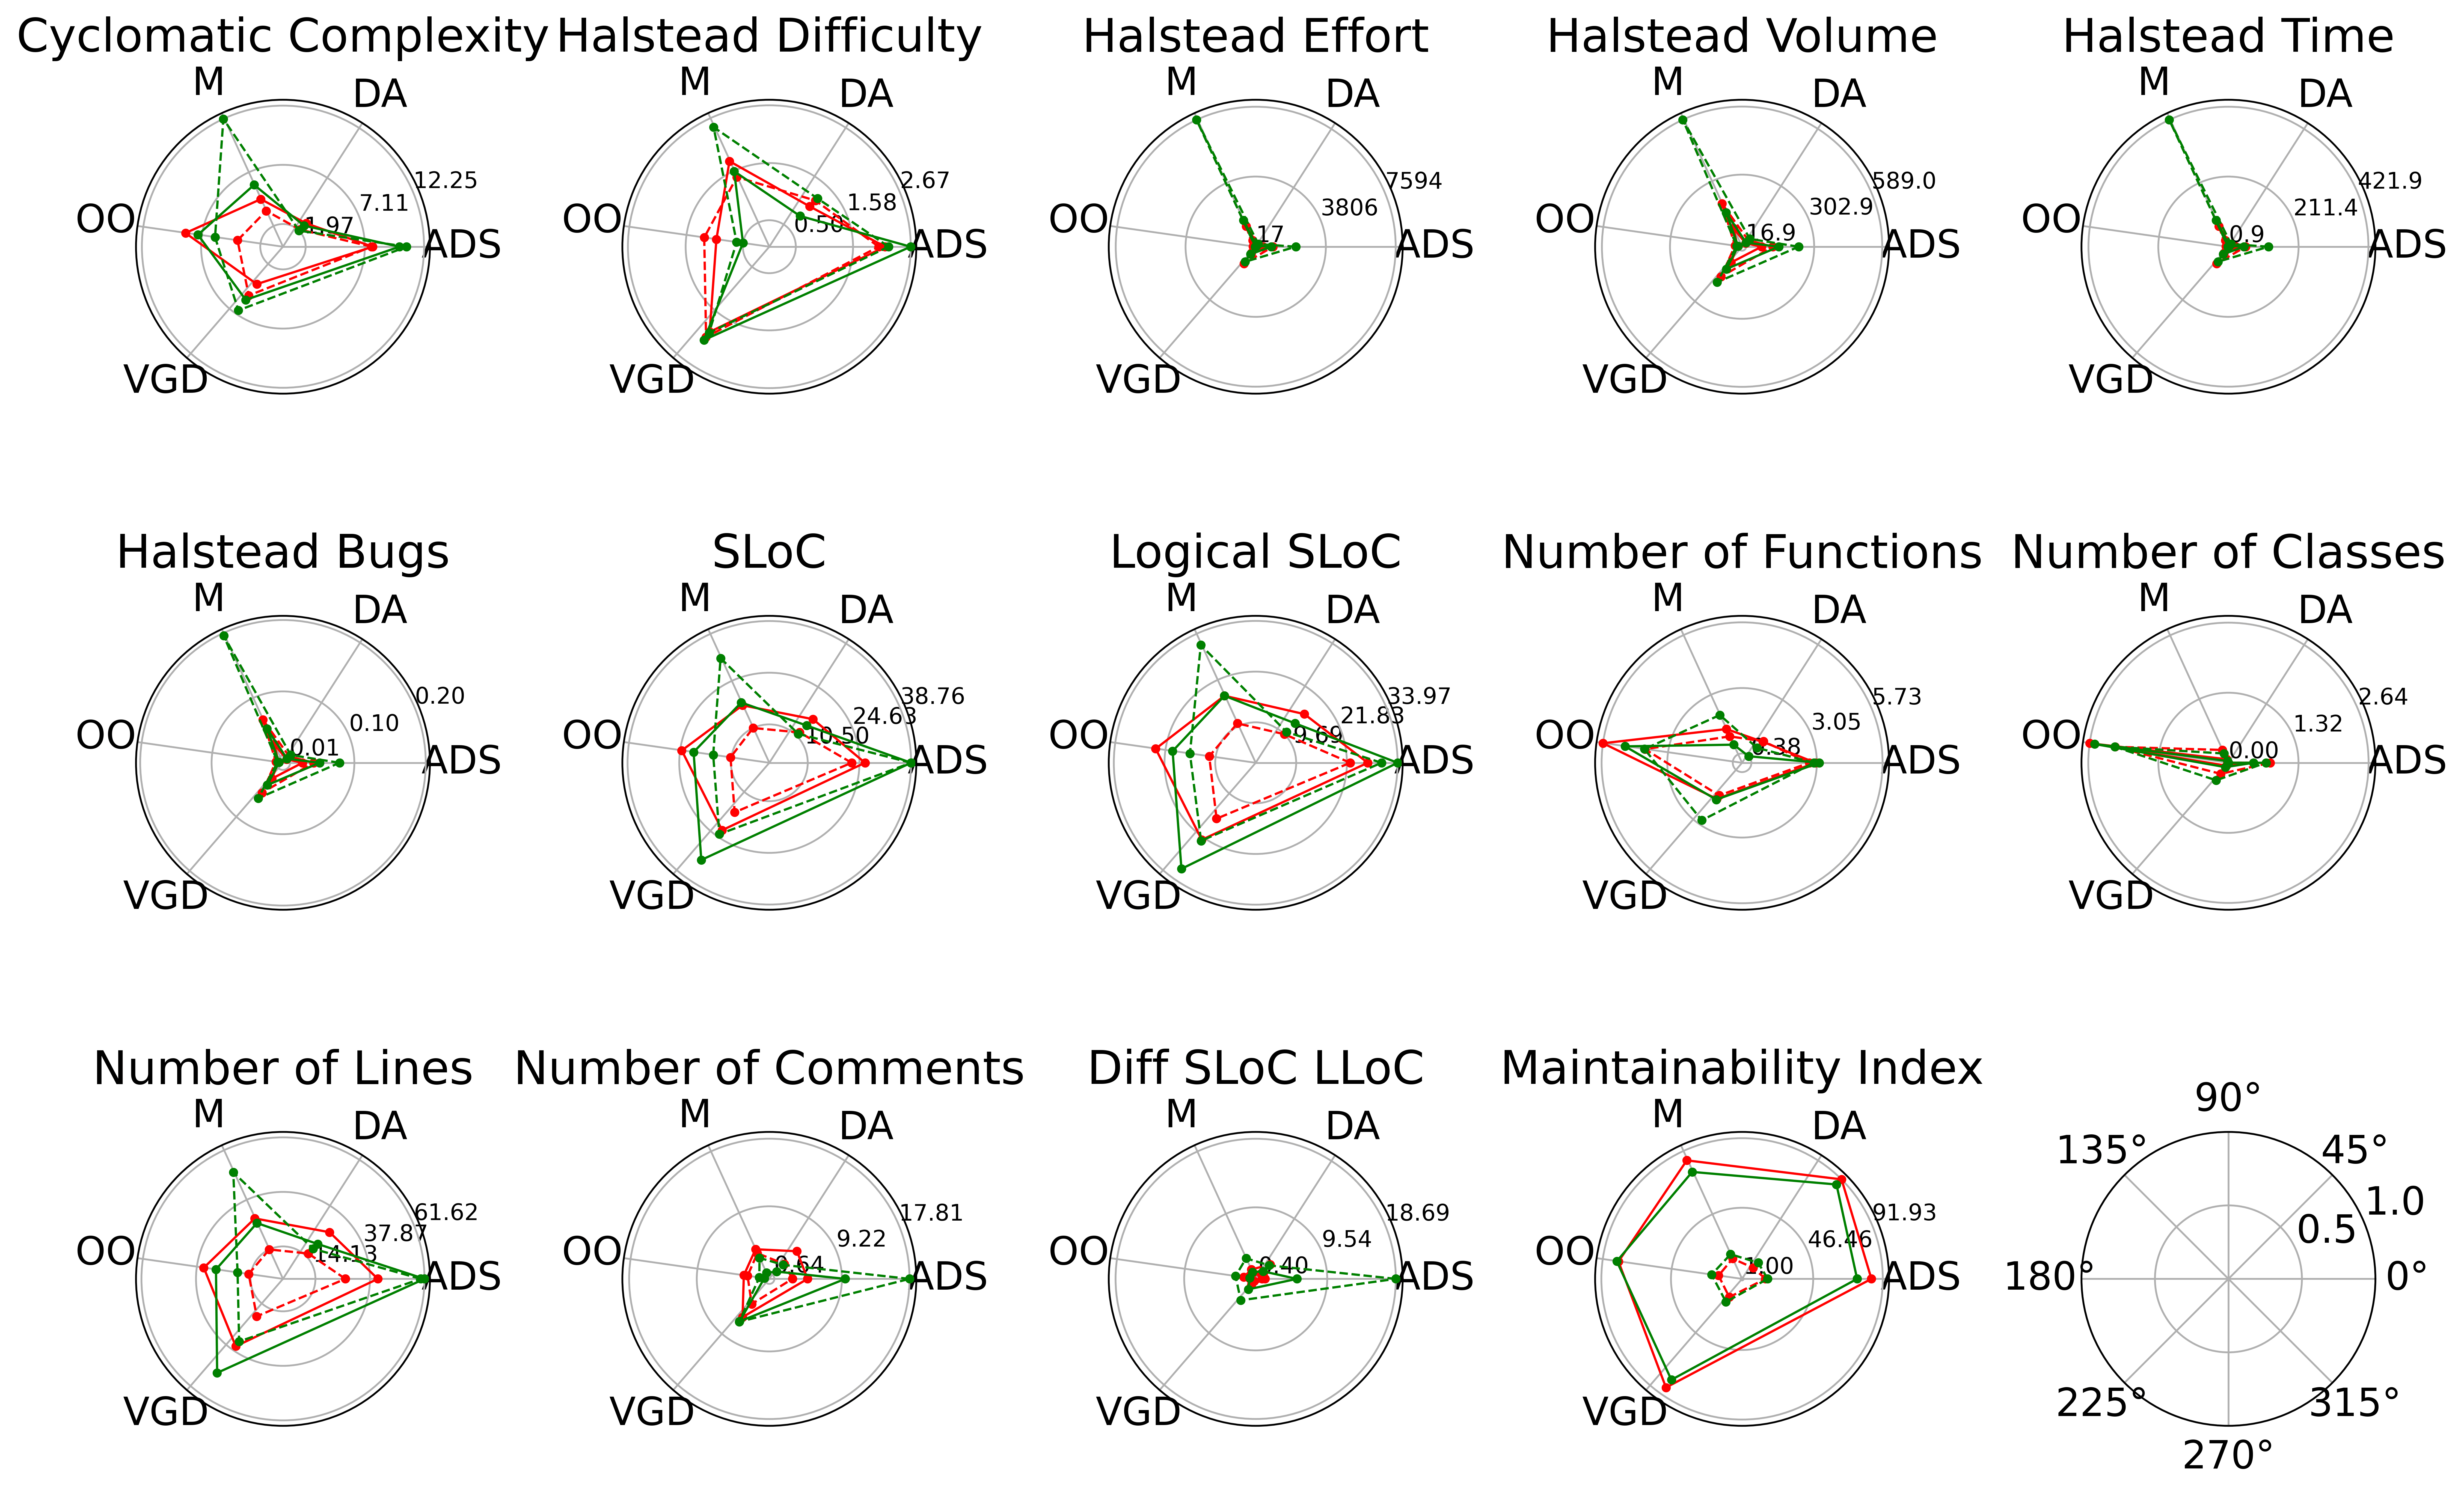 The radar plots compare various metrics between ChatGPT and human coding styles across multiple categories: Cyclomatic Complexity, Halstead Difficulty, Halstead Effort, Halstead Volume, Halstead Time, Halstead Bugs, SLoC, Logical SLoC, Number of Functions, Number of Classes, Number of Lines, Number of Comments, Diff SLoC LLoC, and Maintainability Index. Each plot shows the mean (solid lines) and standard deviation (dotted lines) for ChatGPT (red) and human (green) coded examples. The categories include M (Machine), DA (Data Analytics), ADS (Algorithms and Data Structures), OO (Object-Oriented), and VGD (Video Game Development).